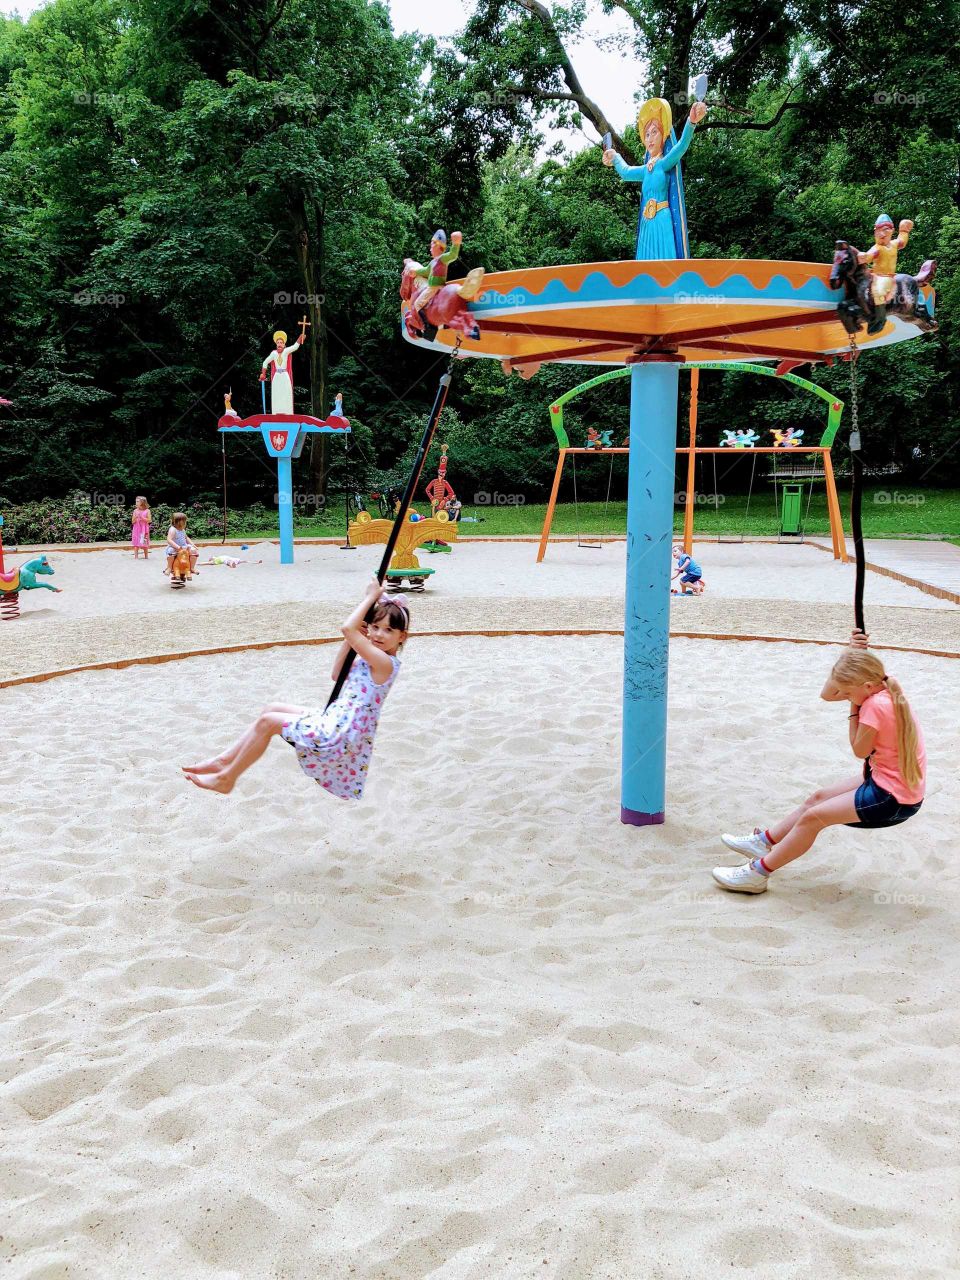 Girls playing on a swing